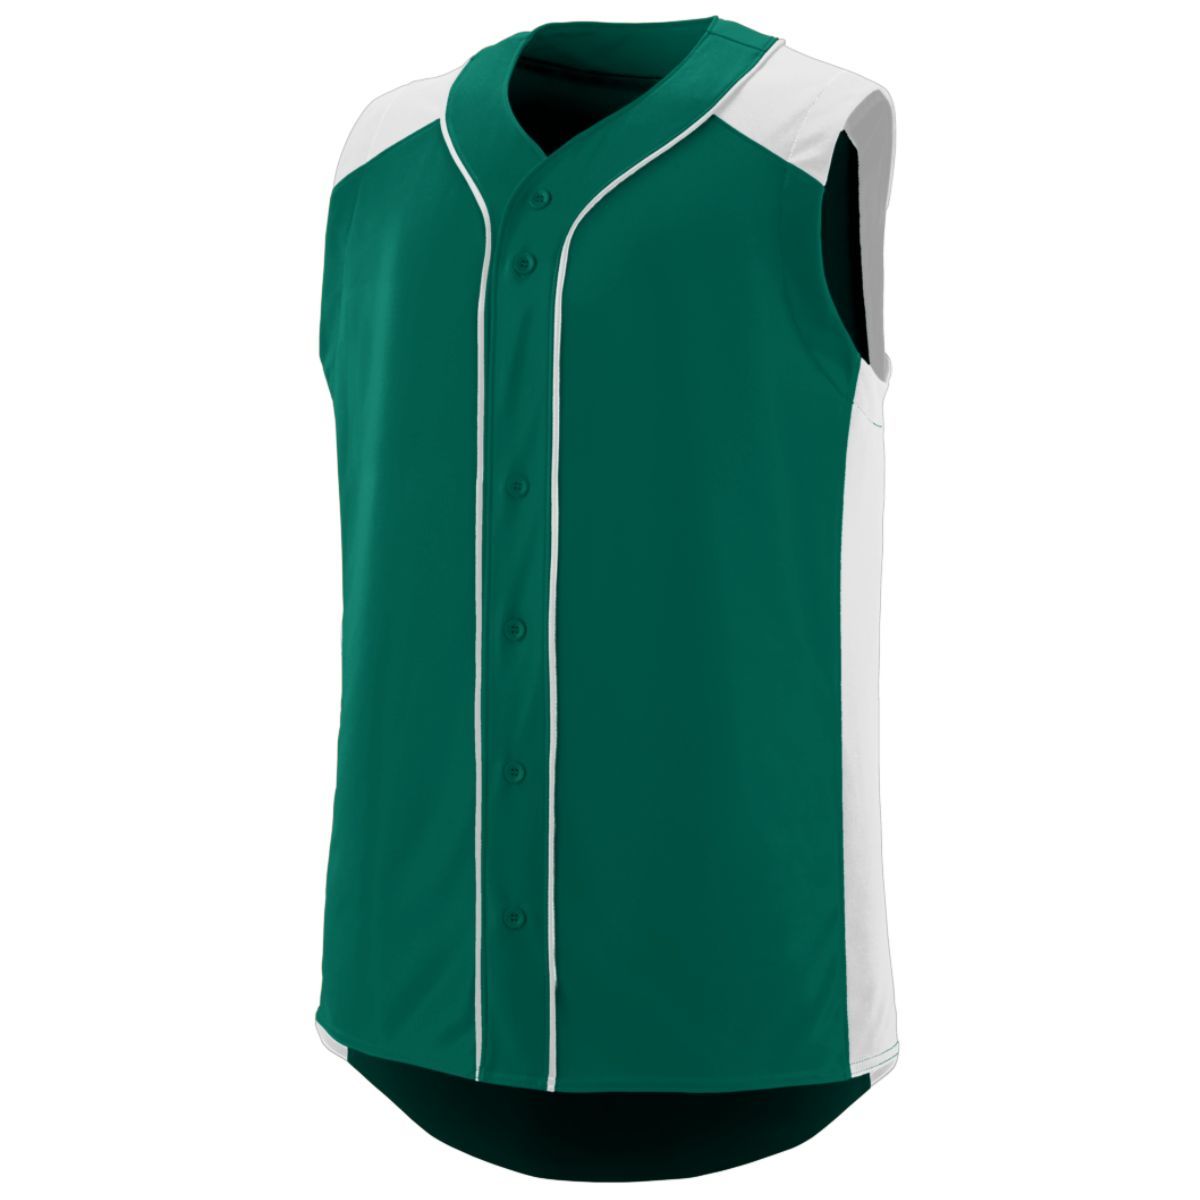 Augusta Sportswear Sleeveless Slugger Jersey in Dark Green/White  -Part of the Adult, Adult-Jersey, Augusta-Products, Baseball, Shirts, All-Sports, All-Sports-1 product lines at KanaleyCreations.com